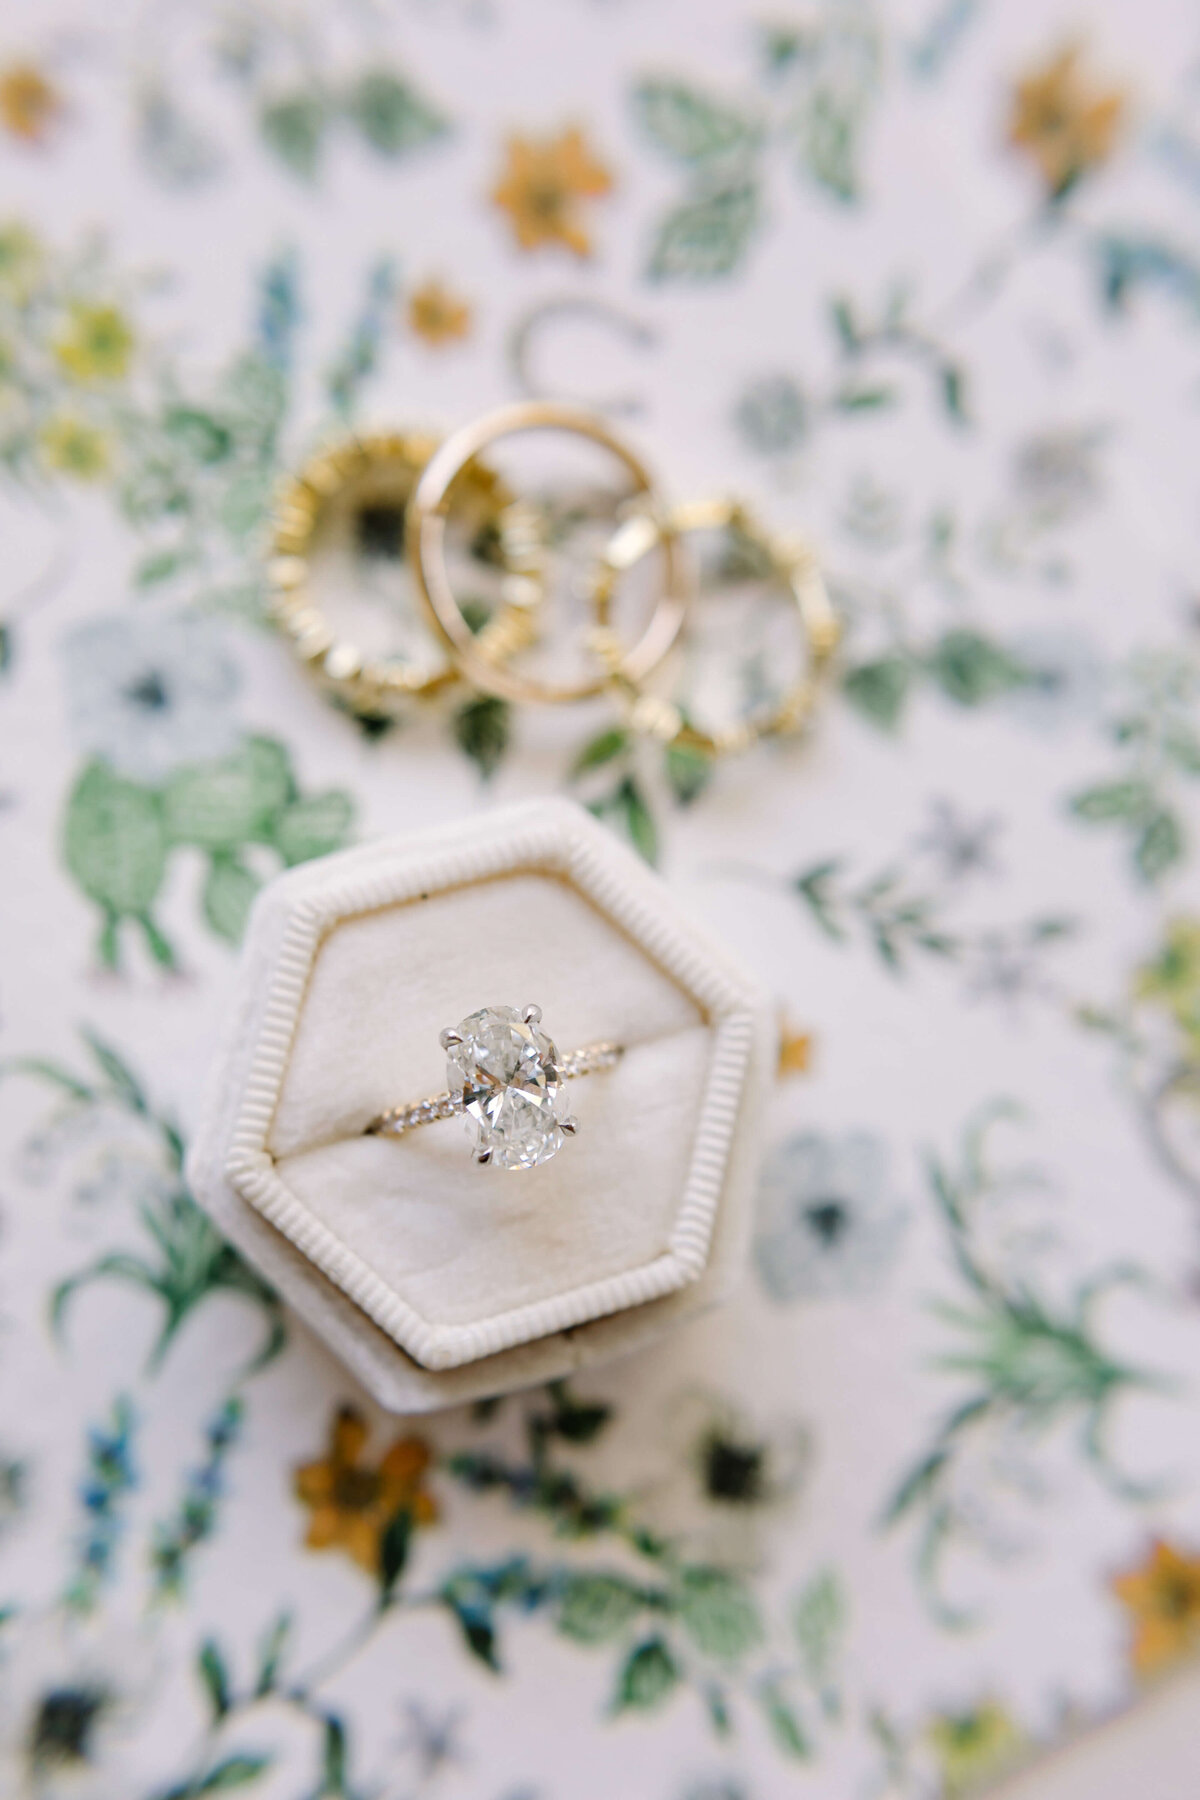 Classic wedding day details and engagement ring